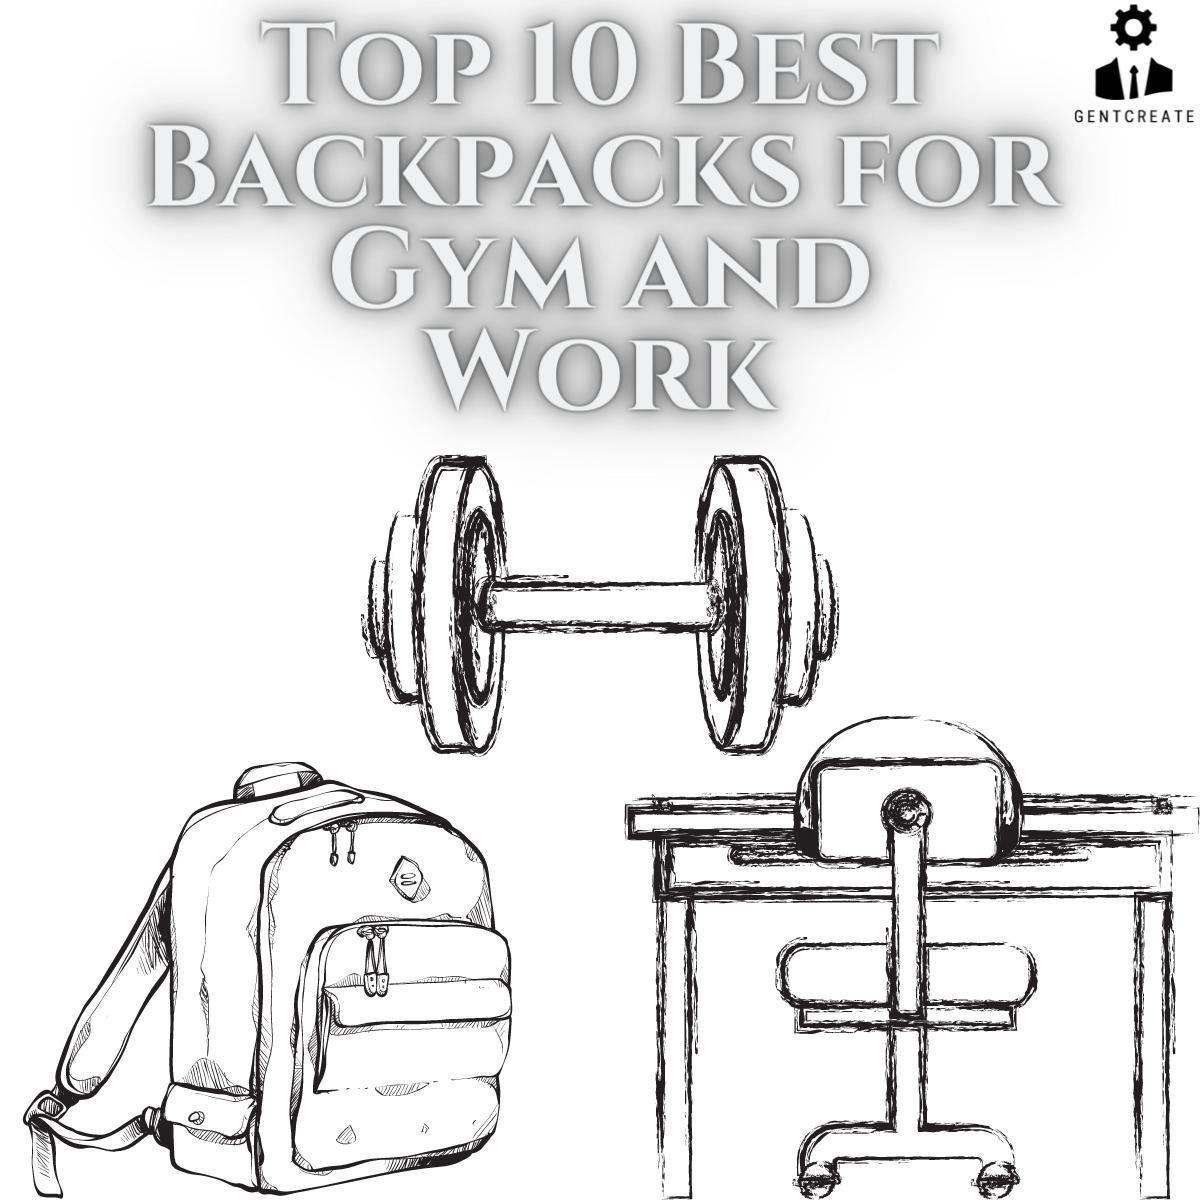 Top 10 Best Backpacks for Gym and Work